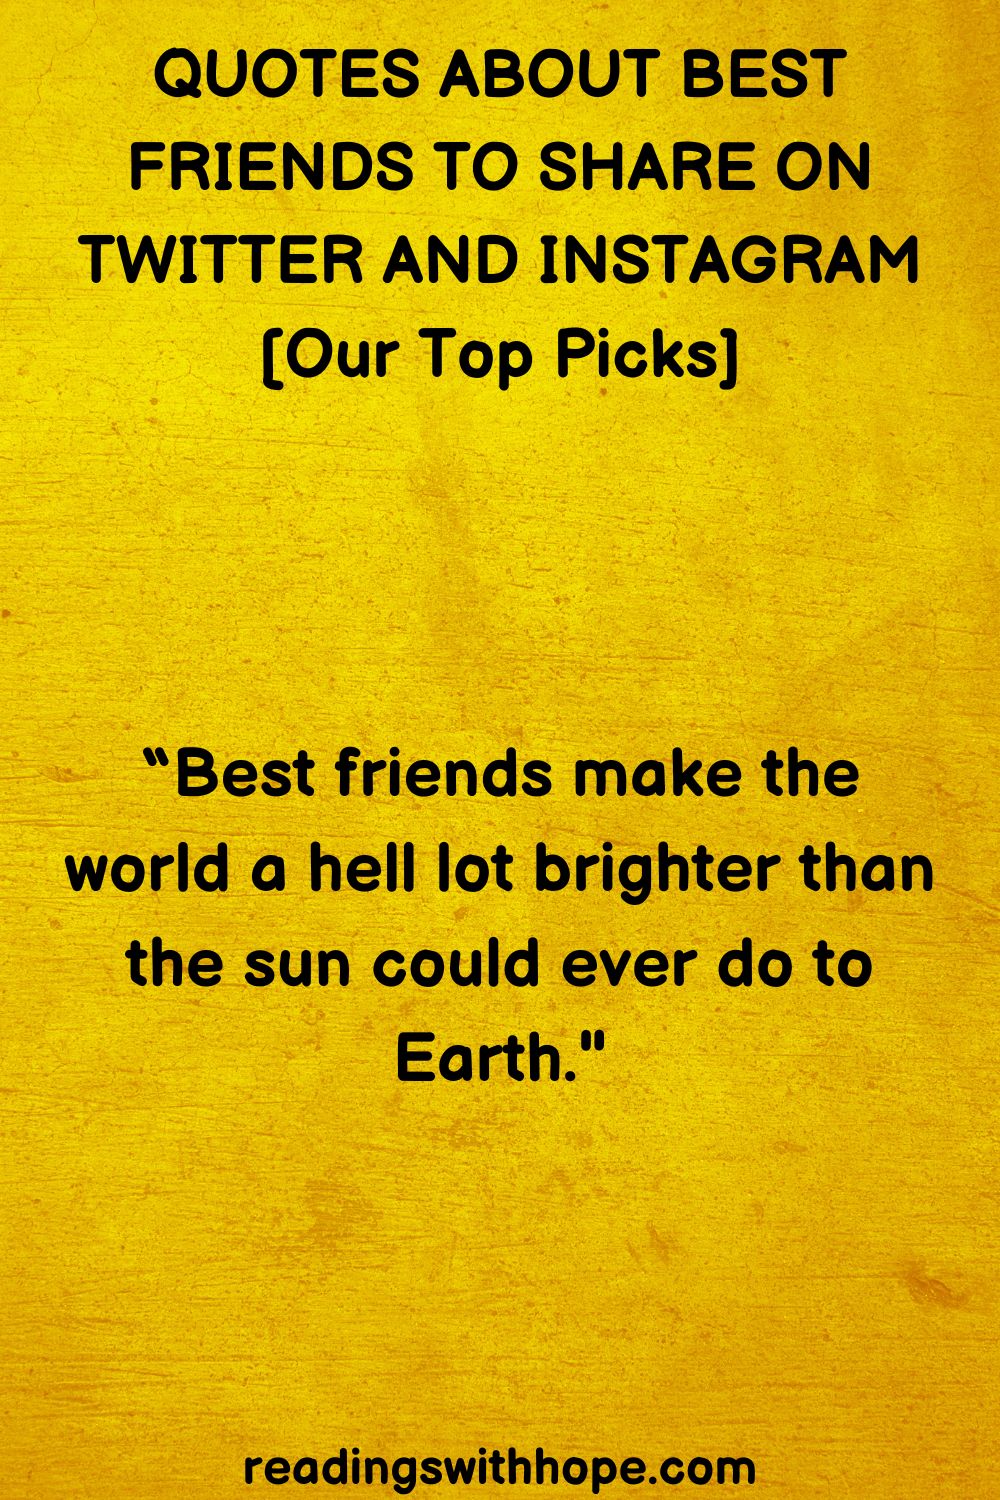 quotes about best friends to share on twitter and instagram